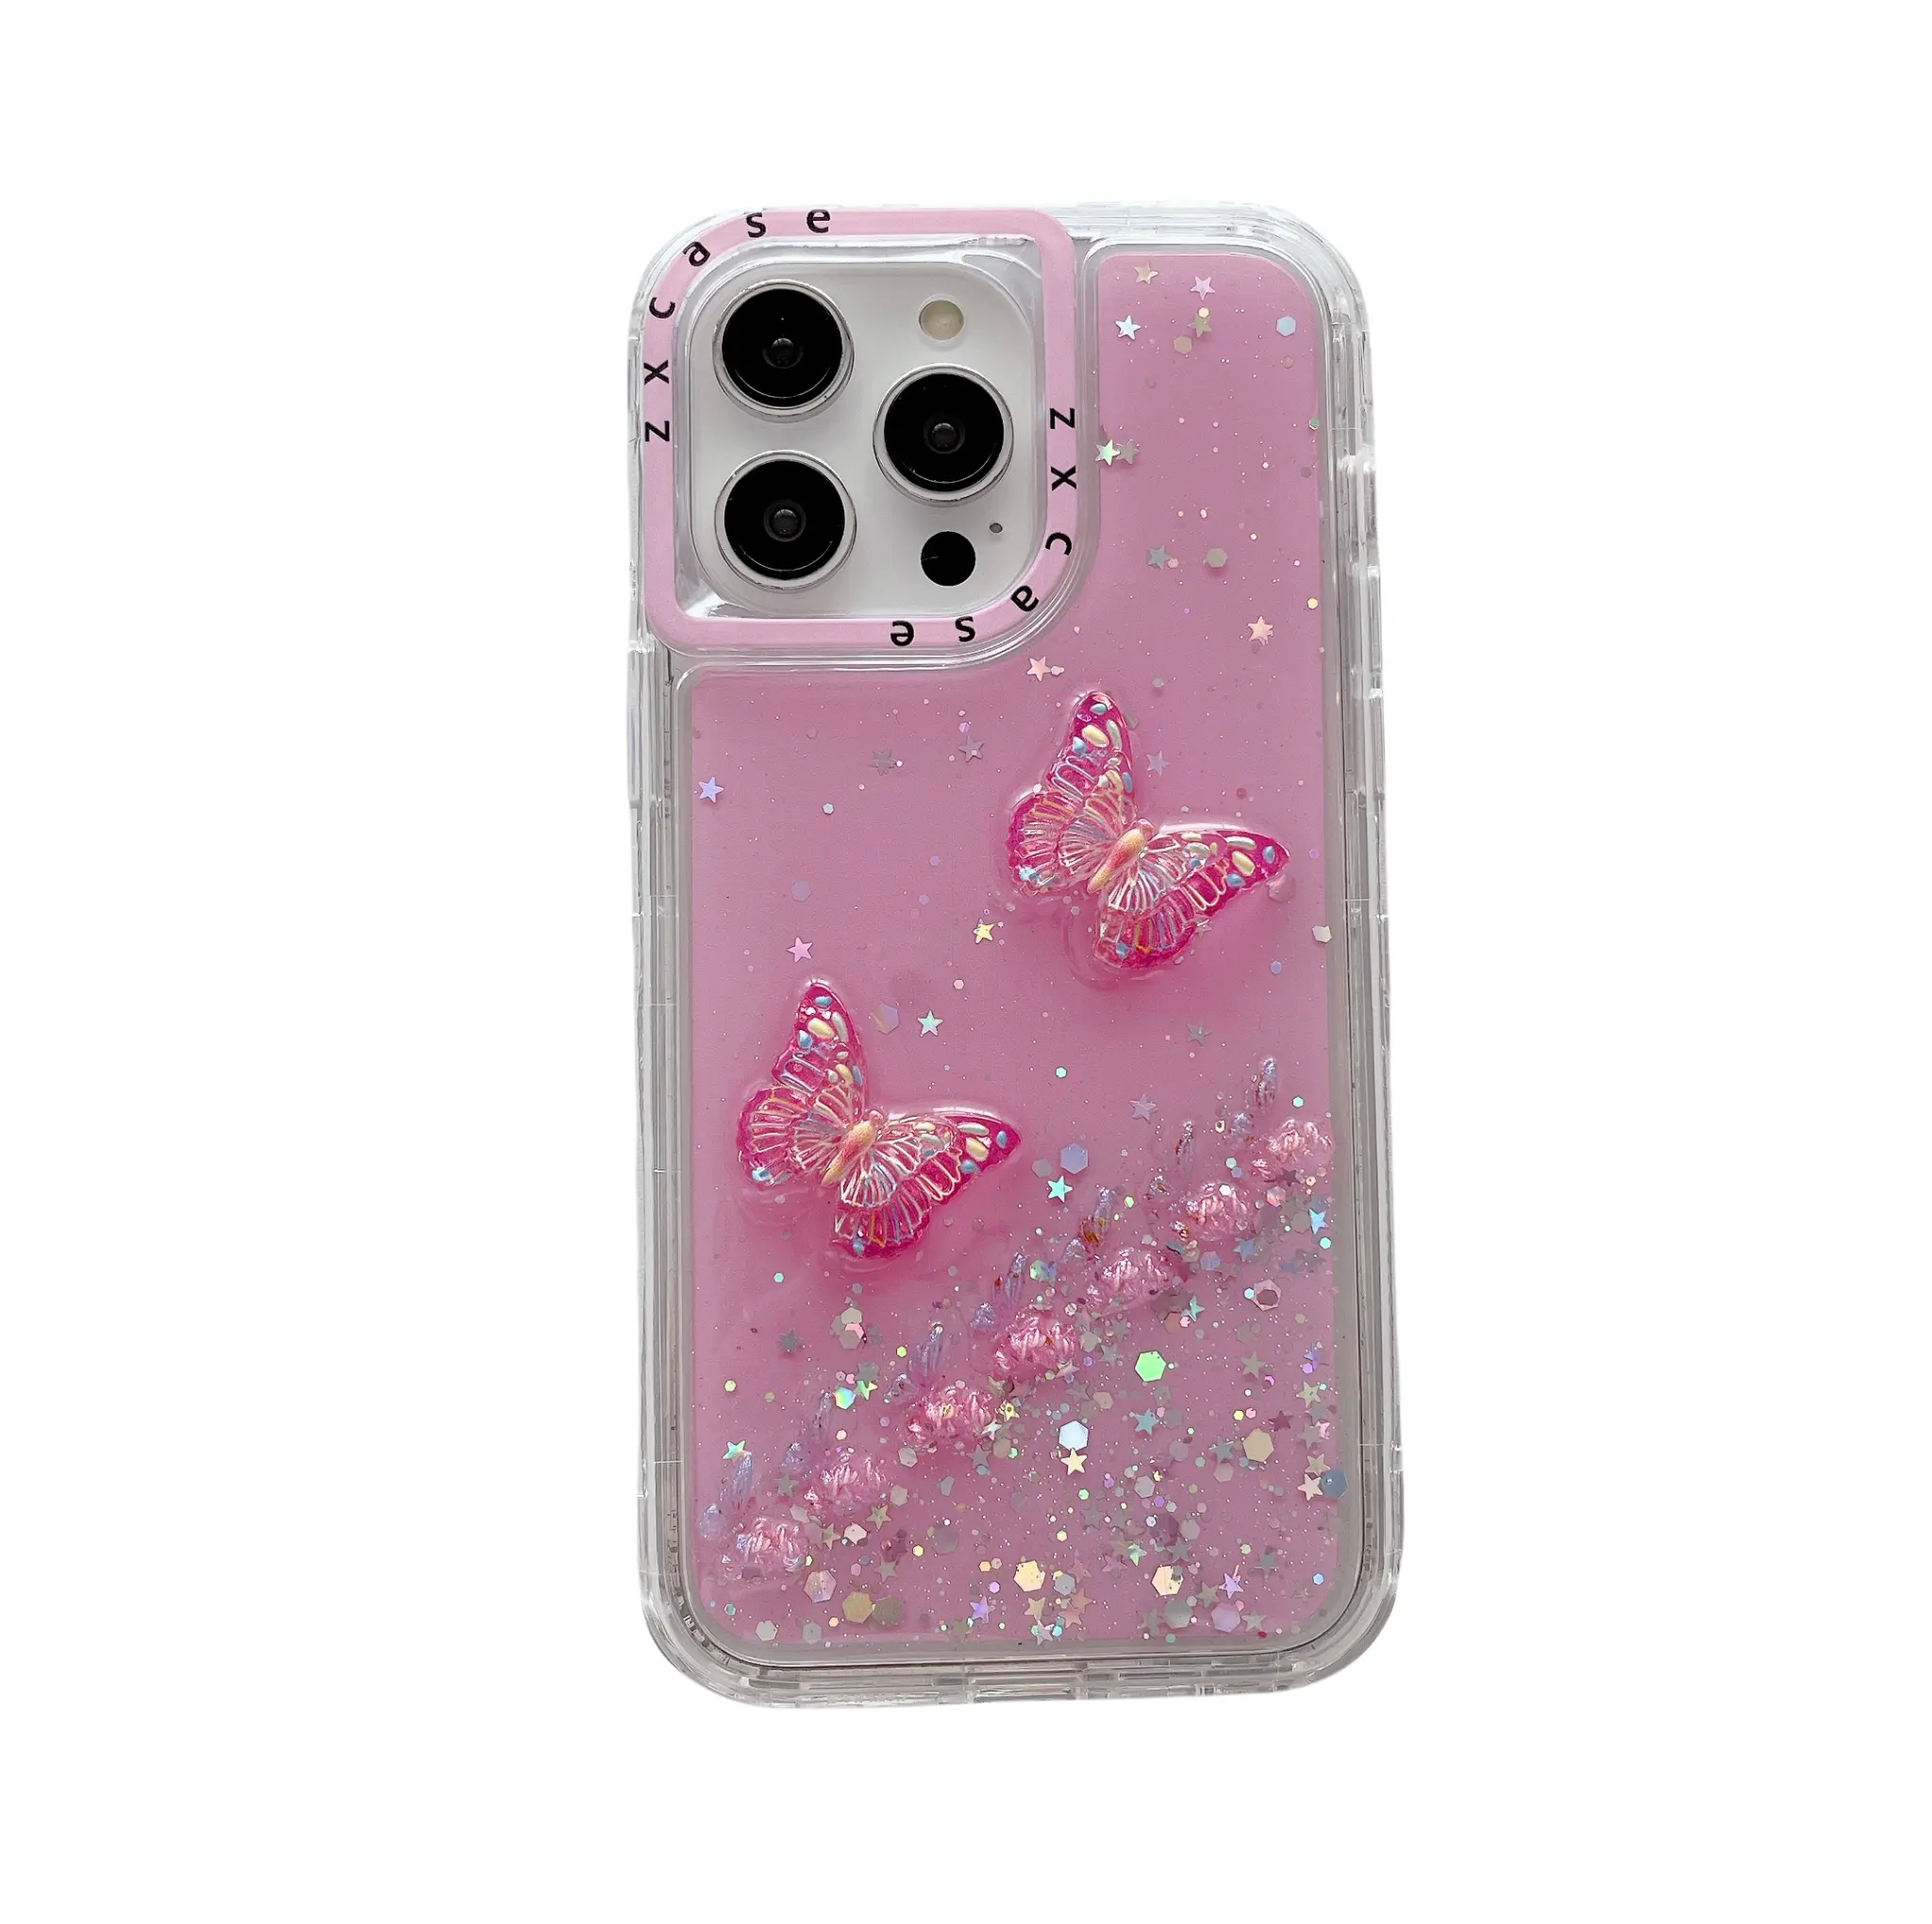 NEW customize design phone case 3 IN 1 PC TPU phone cover protector for infinix comon 30 4g/5g